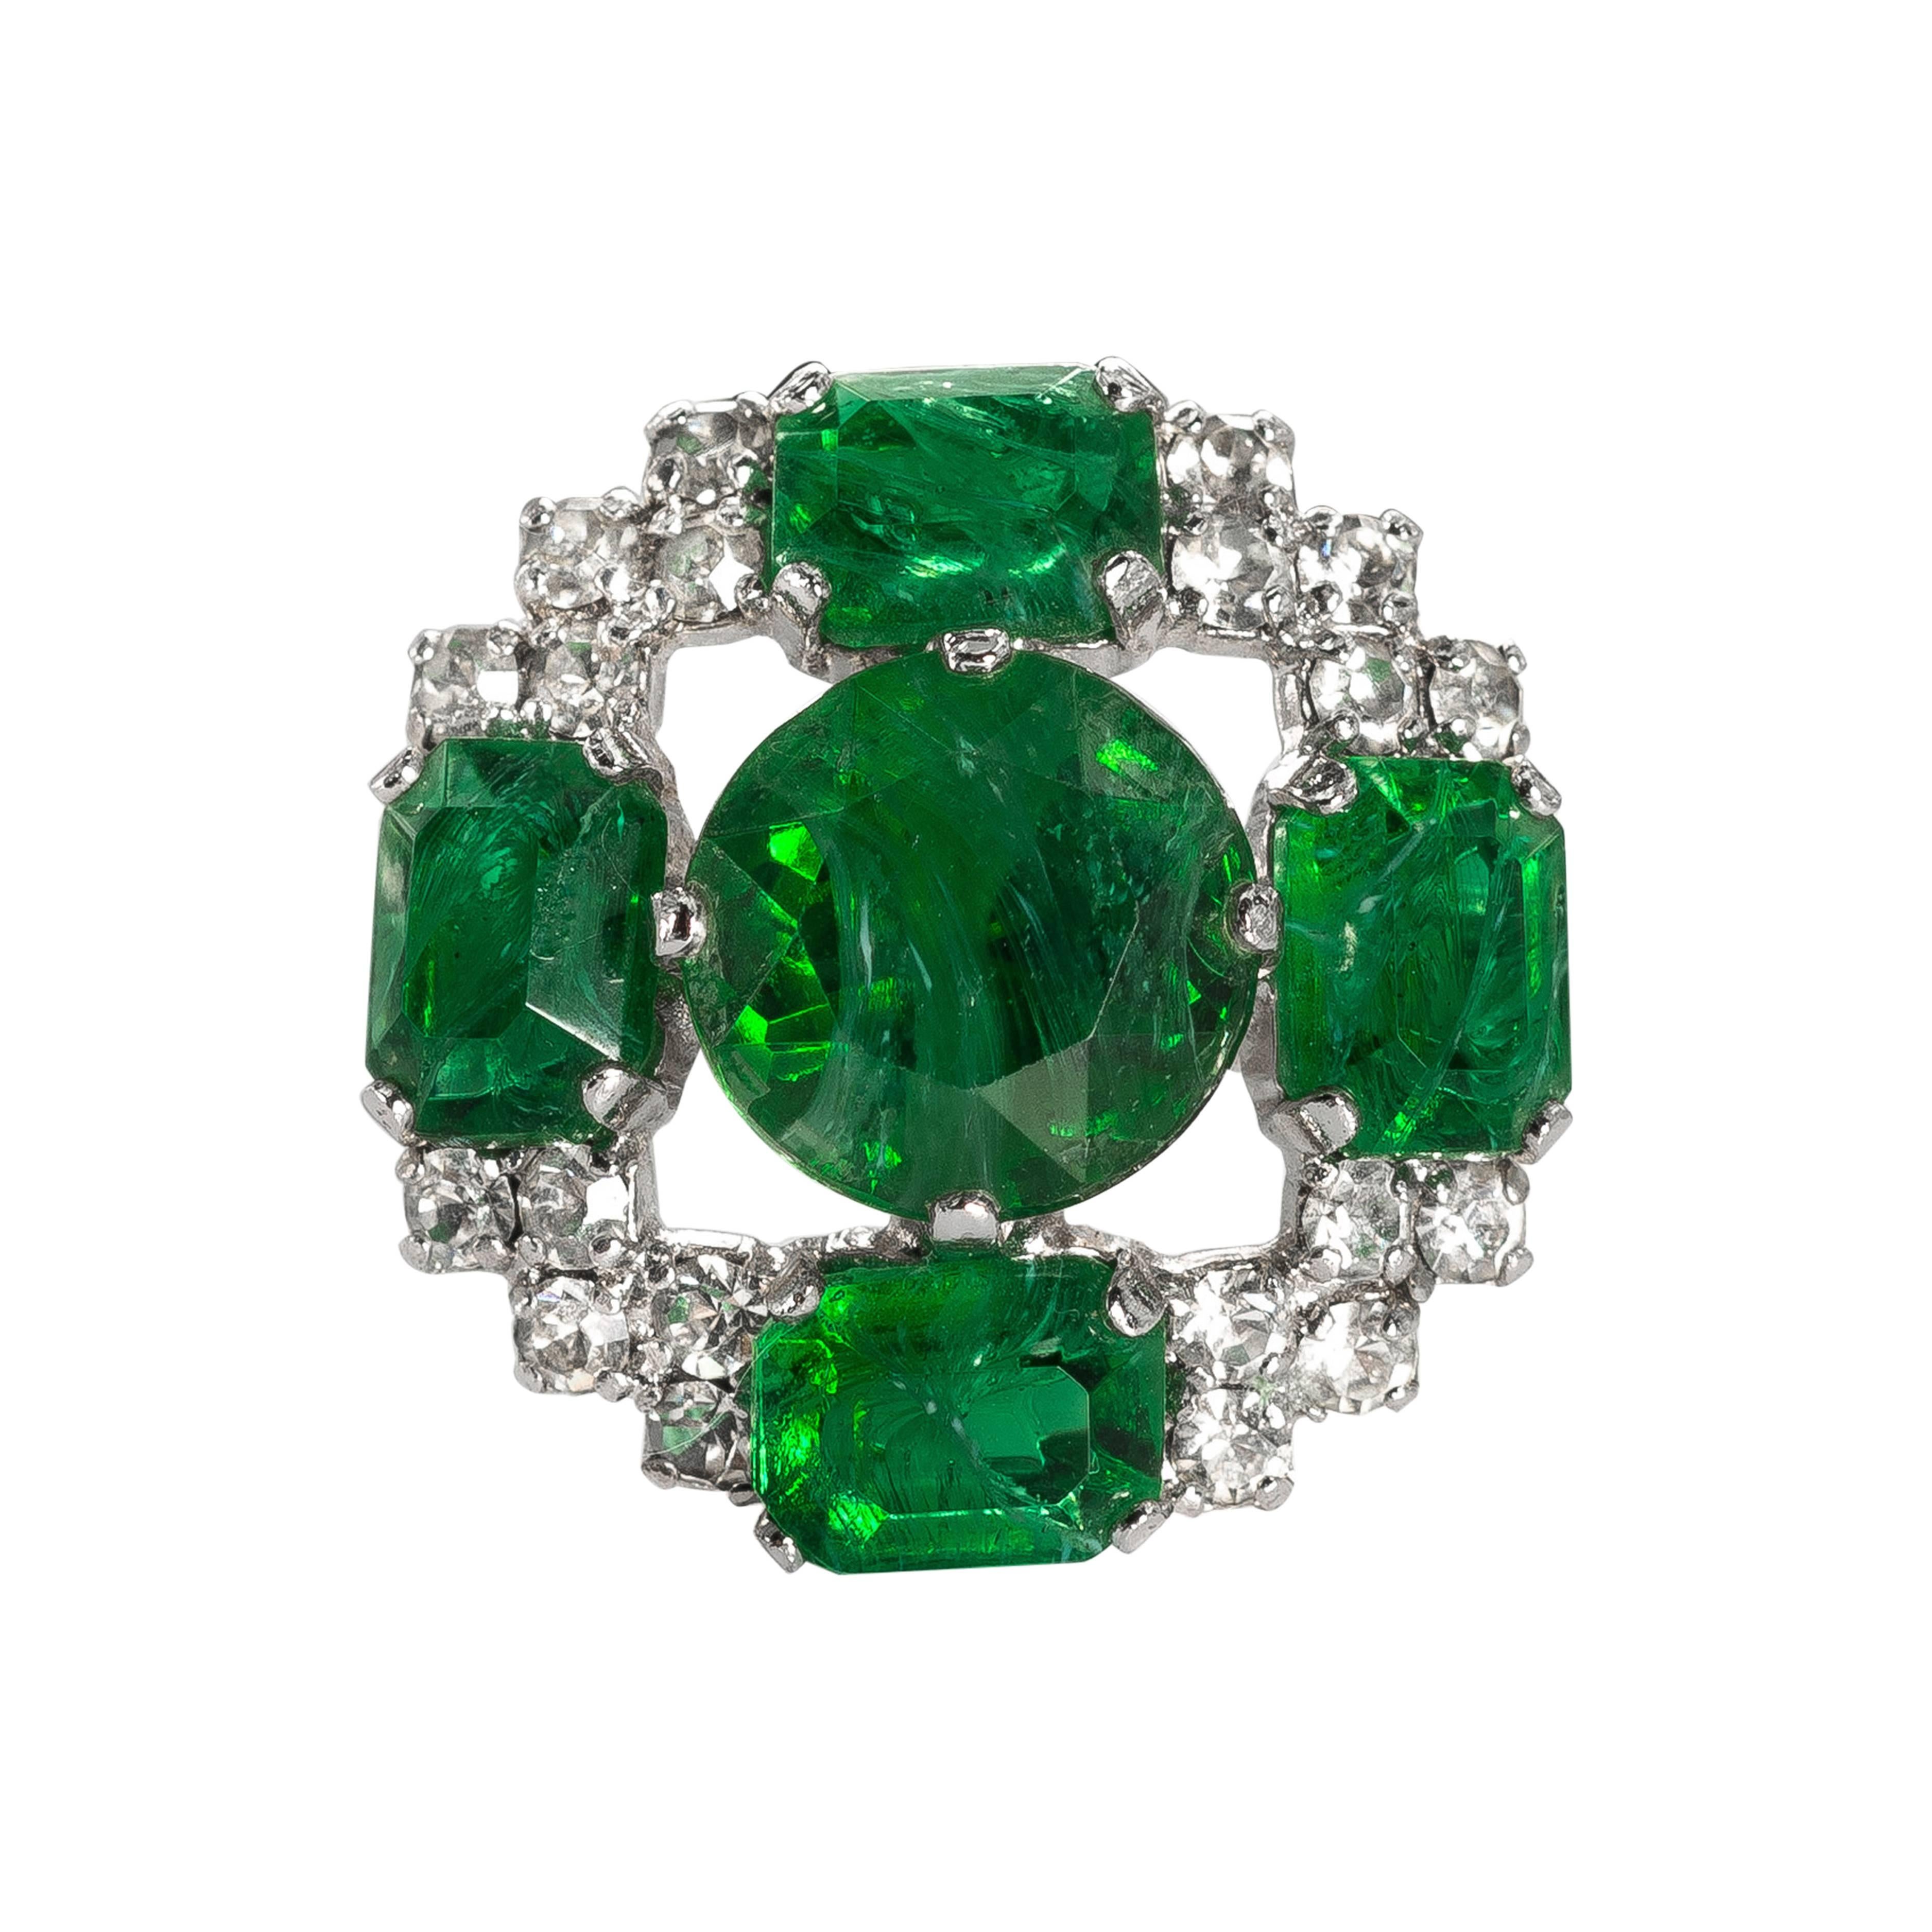 Signed Vintage 1960s Christian Dior Faux Emerald Diamond Ring